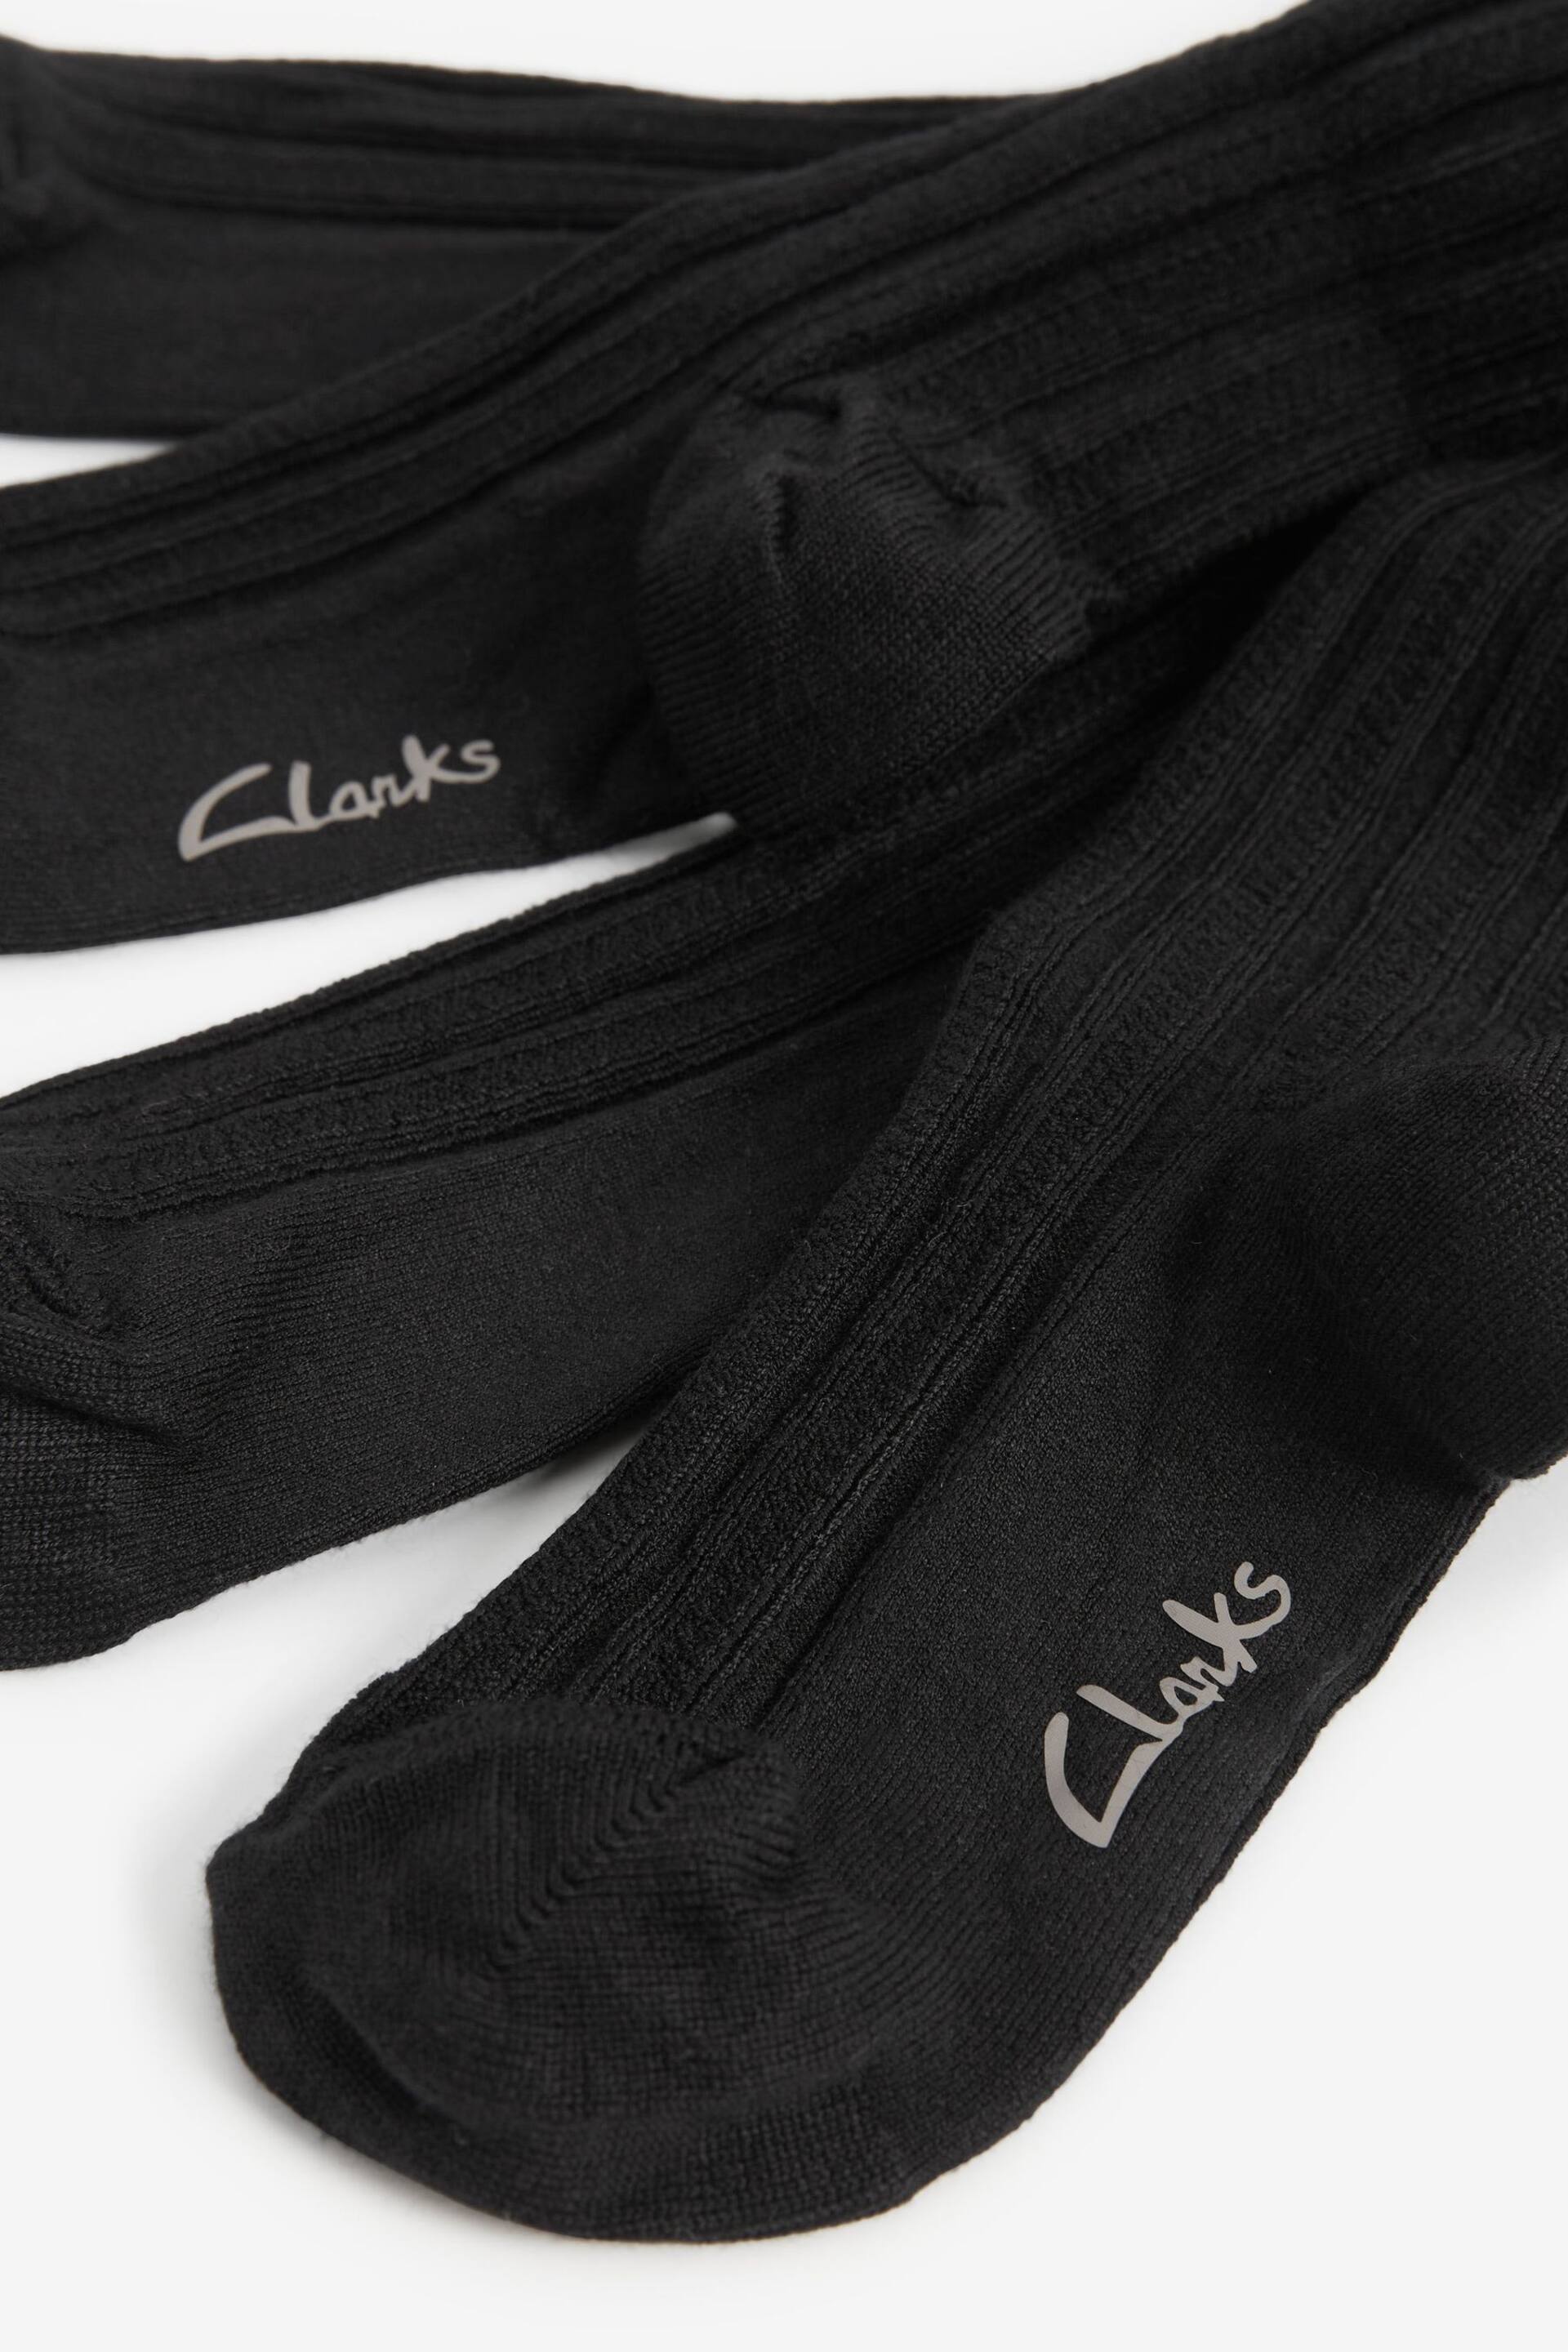 Clarks Black Ribbed Tights 2 Pack - Image 3 of 3